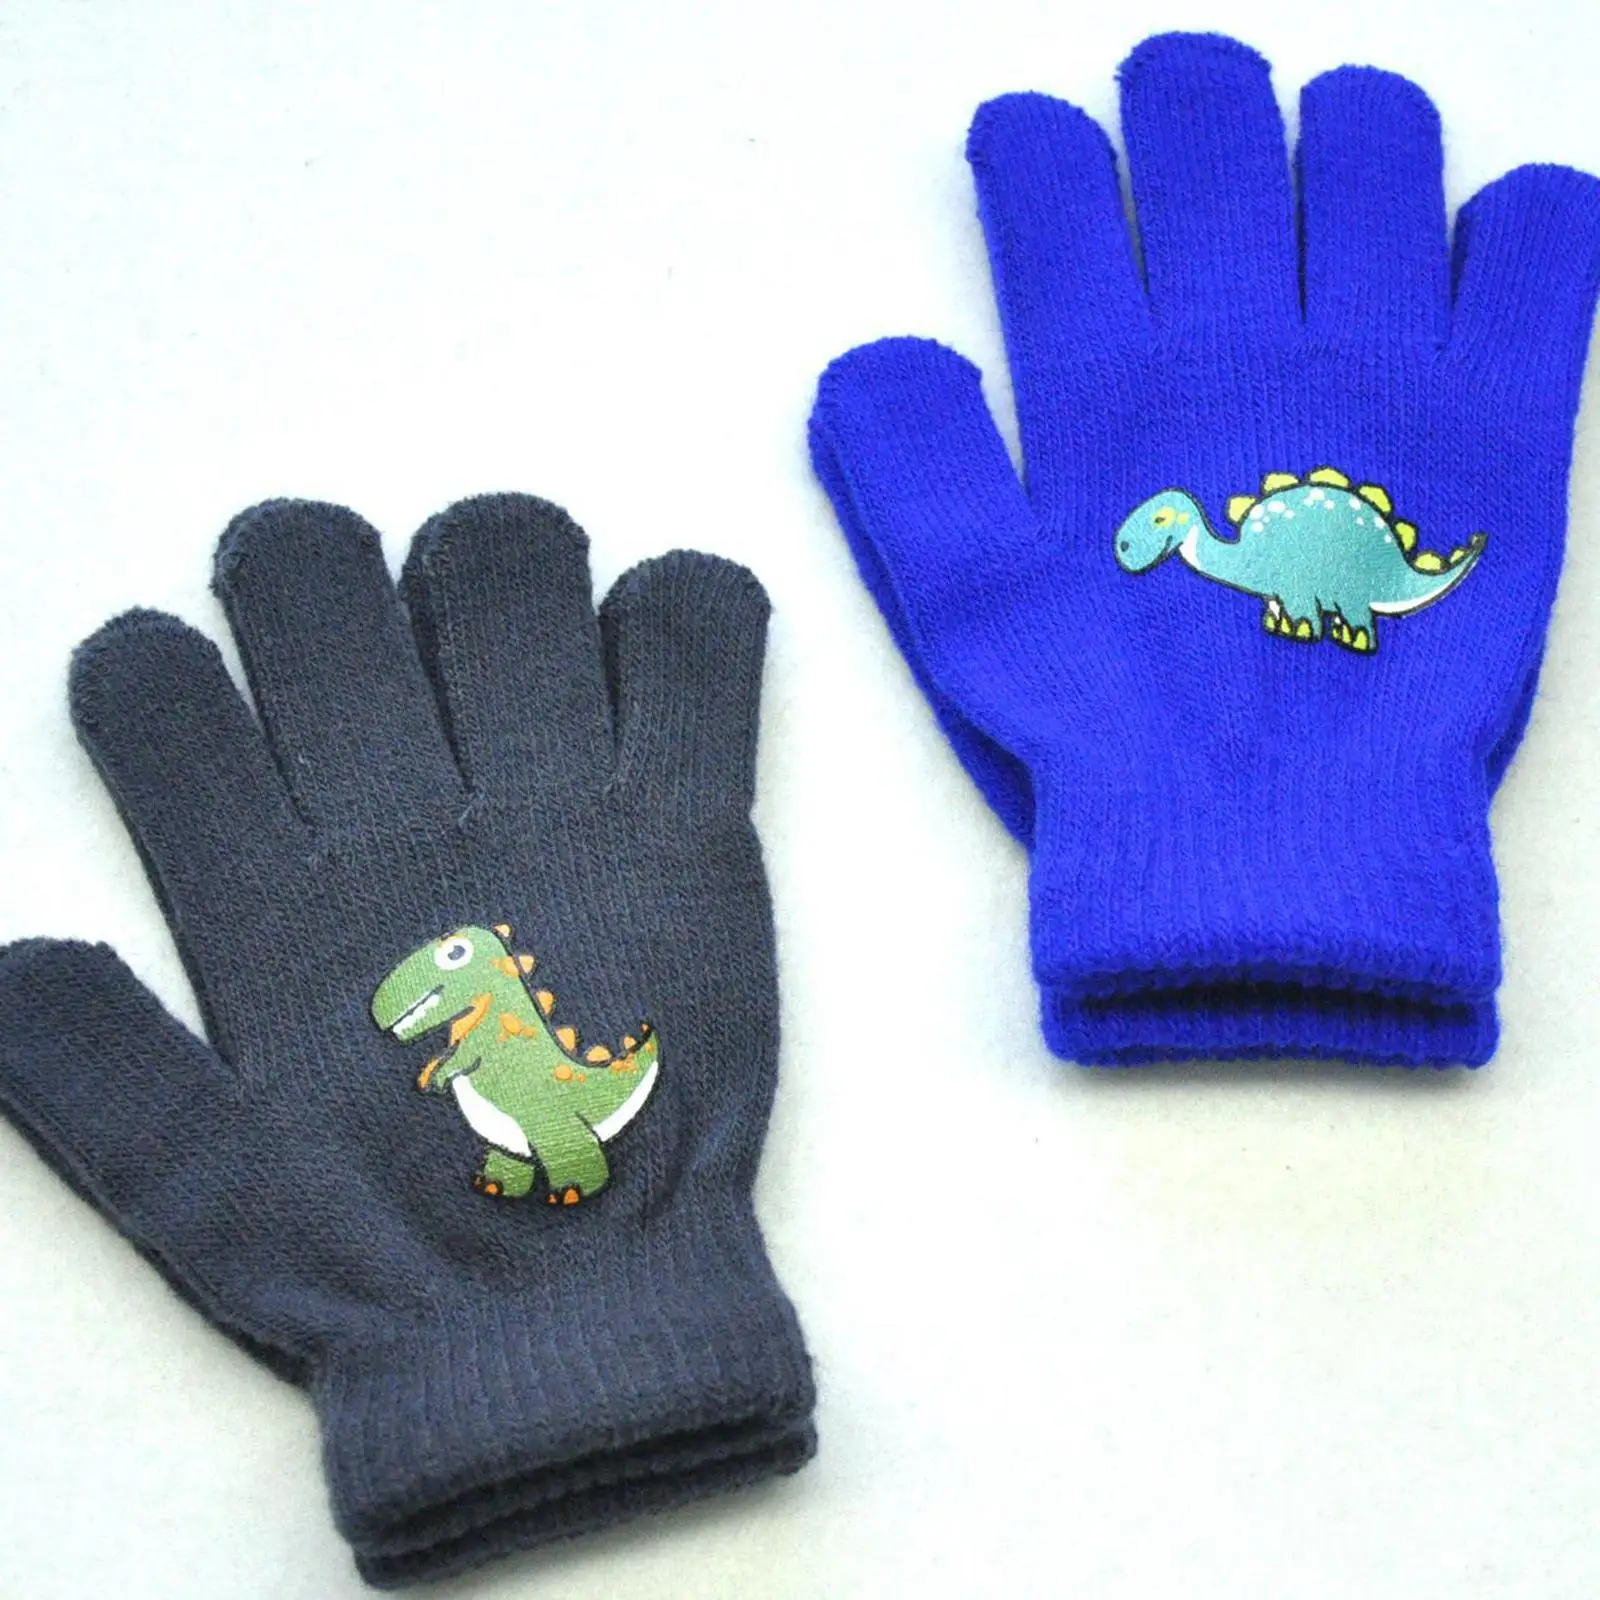 6 Pairs Kid Winter Gloves Stretchy Full Fingers Mitten Hand Warmer Thick Child Toddlers Cold Weather Outdoor Sports